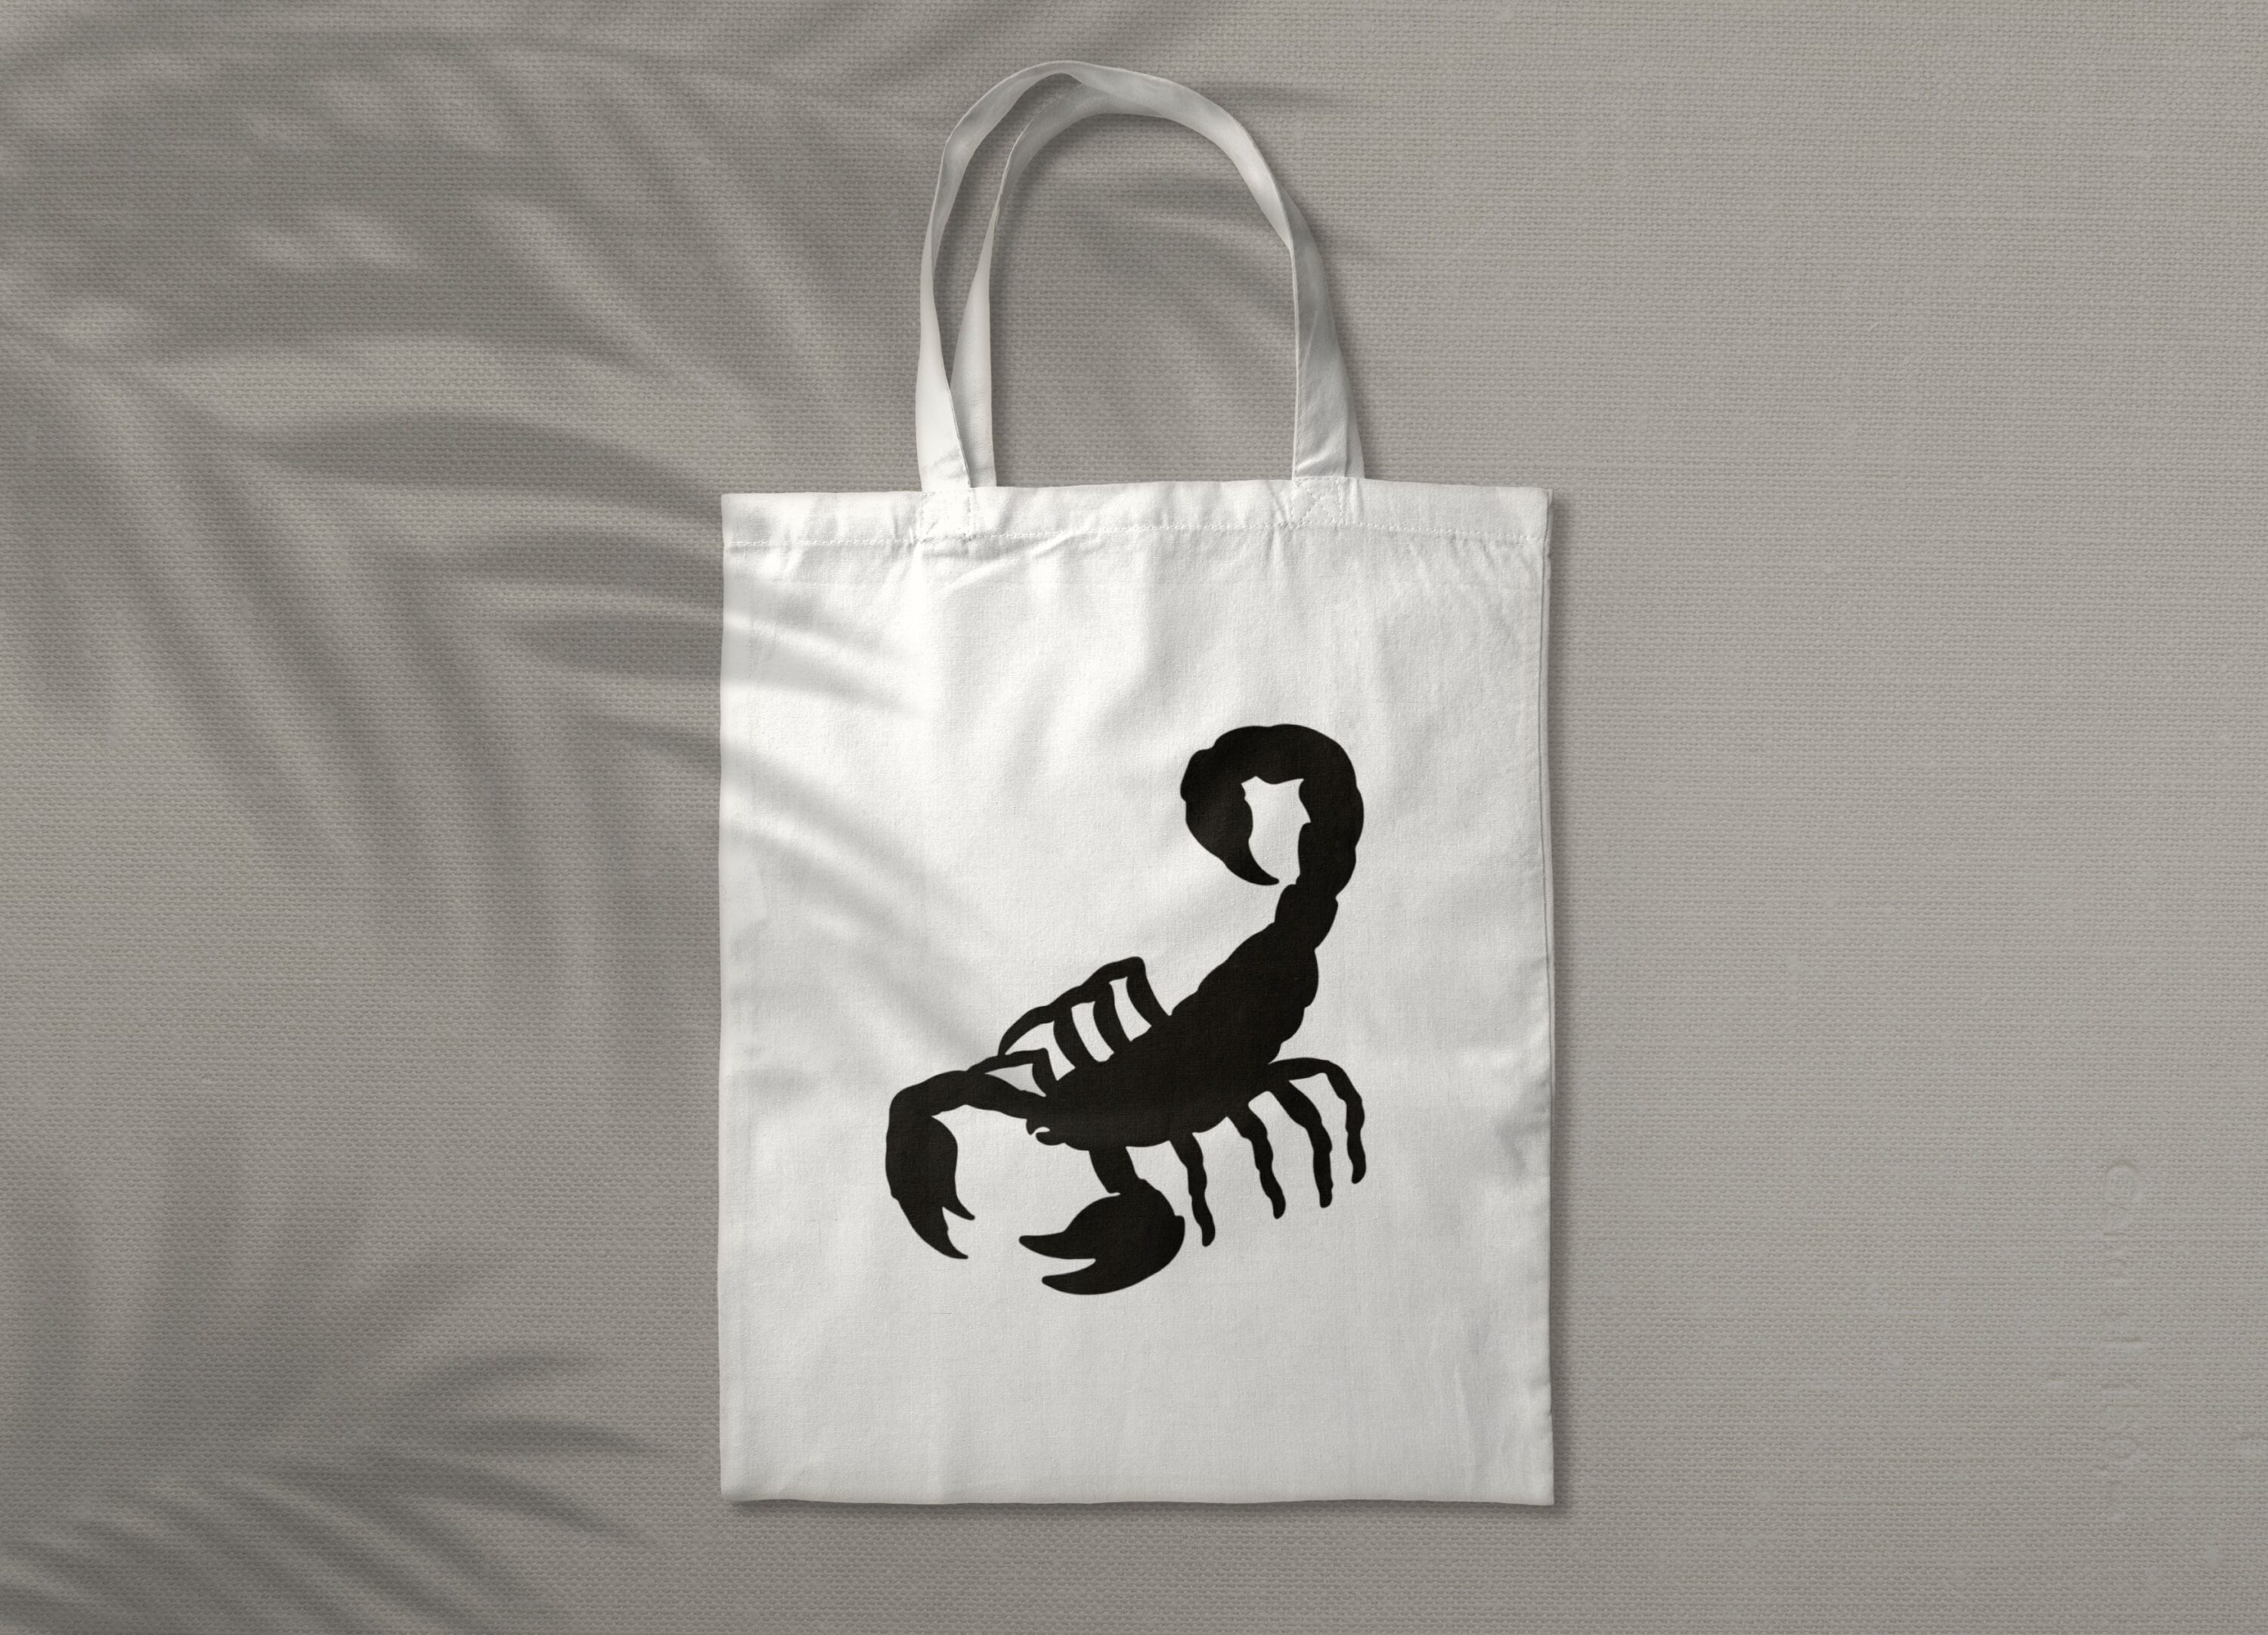 Preview of scorpio print on the shopper.